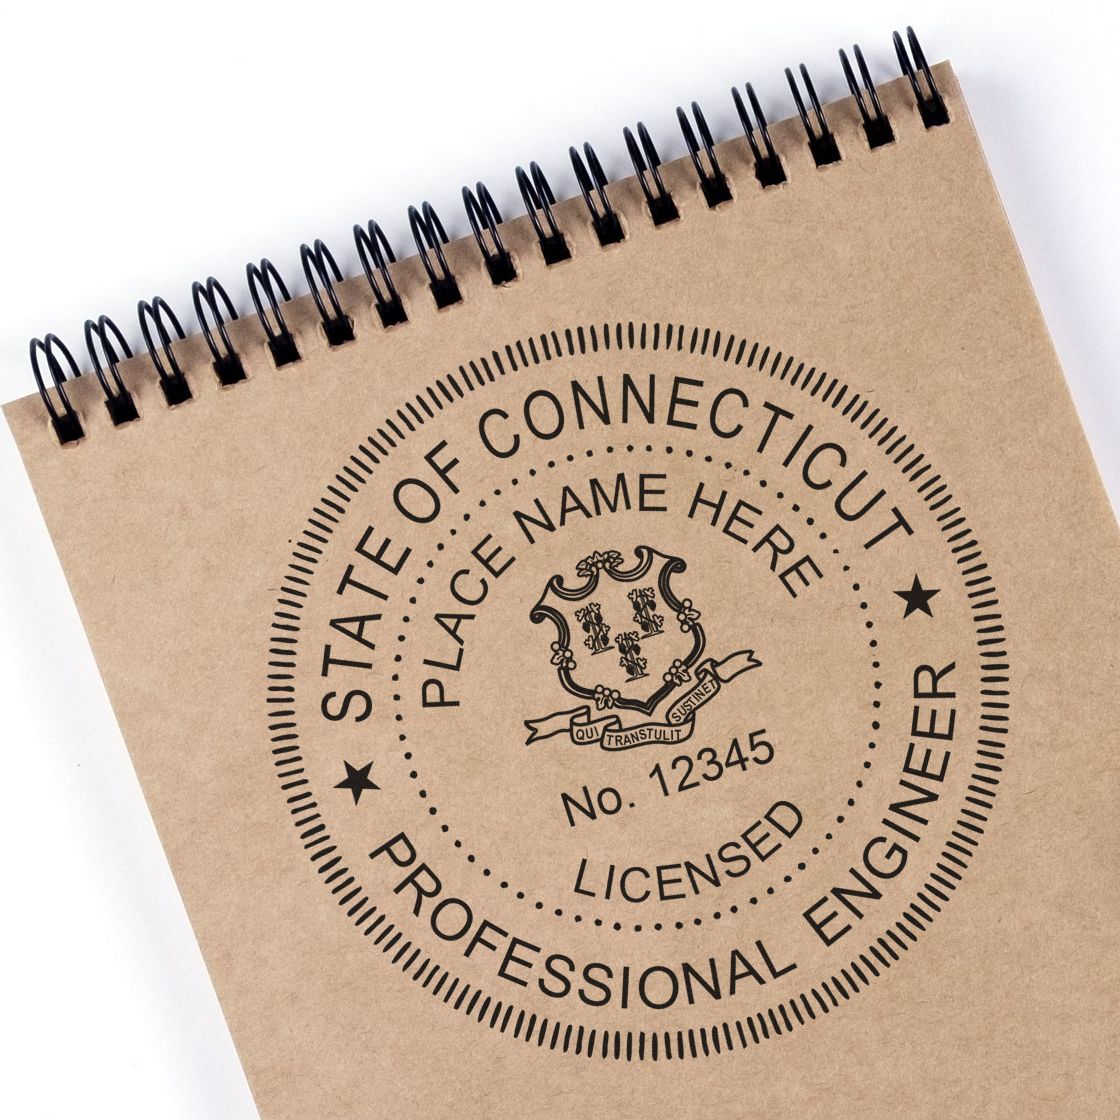 The main image for the Slim Pre-Inked Connecticut Professional Engineer Seal Stamp depicting a sample of the imprint and electronic files